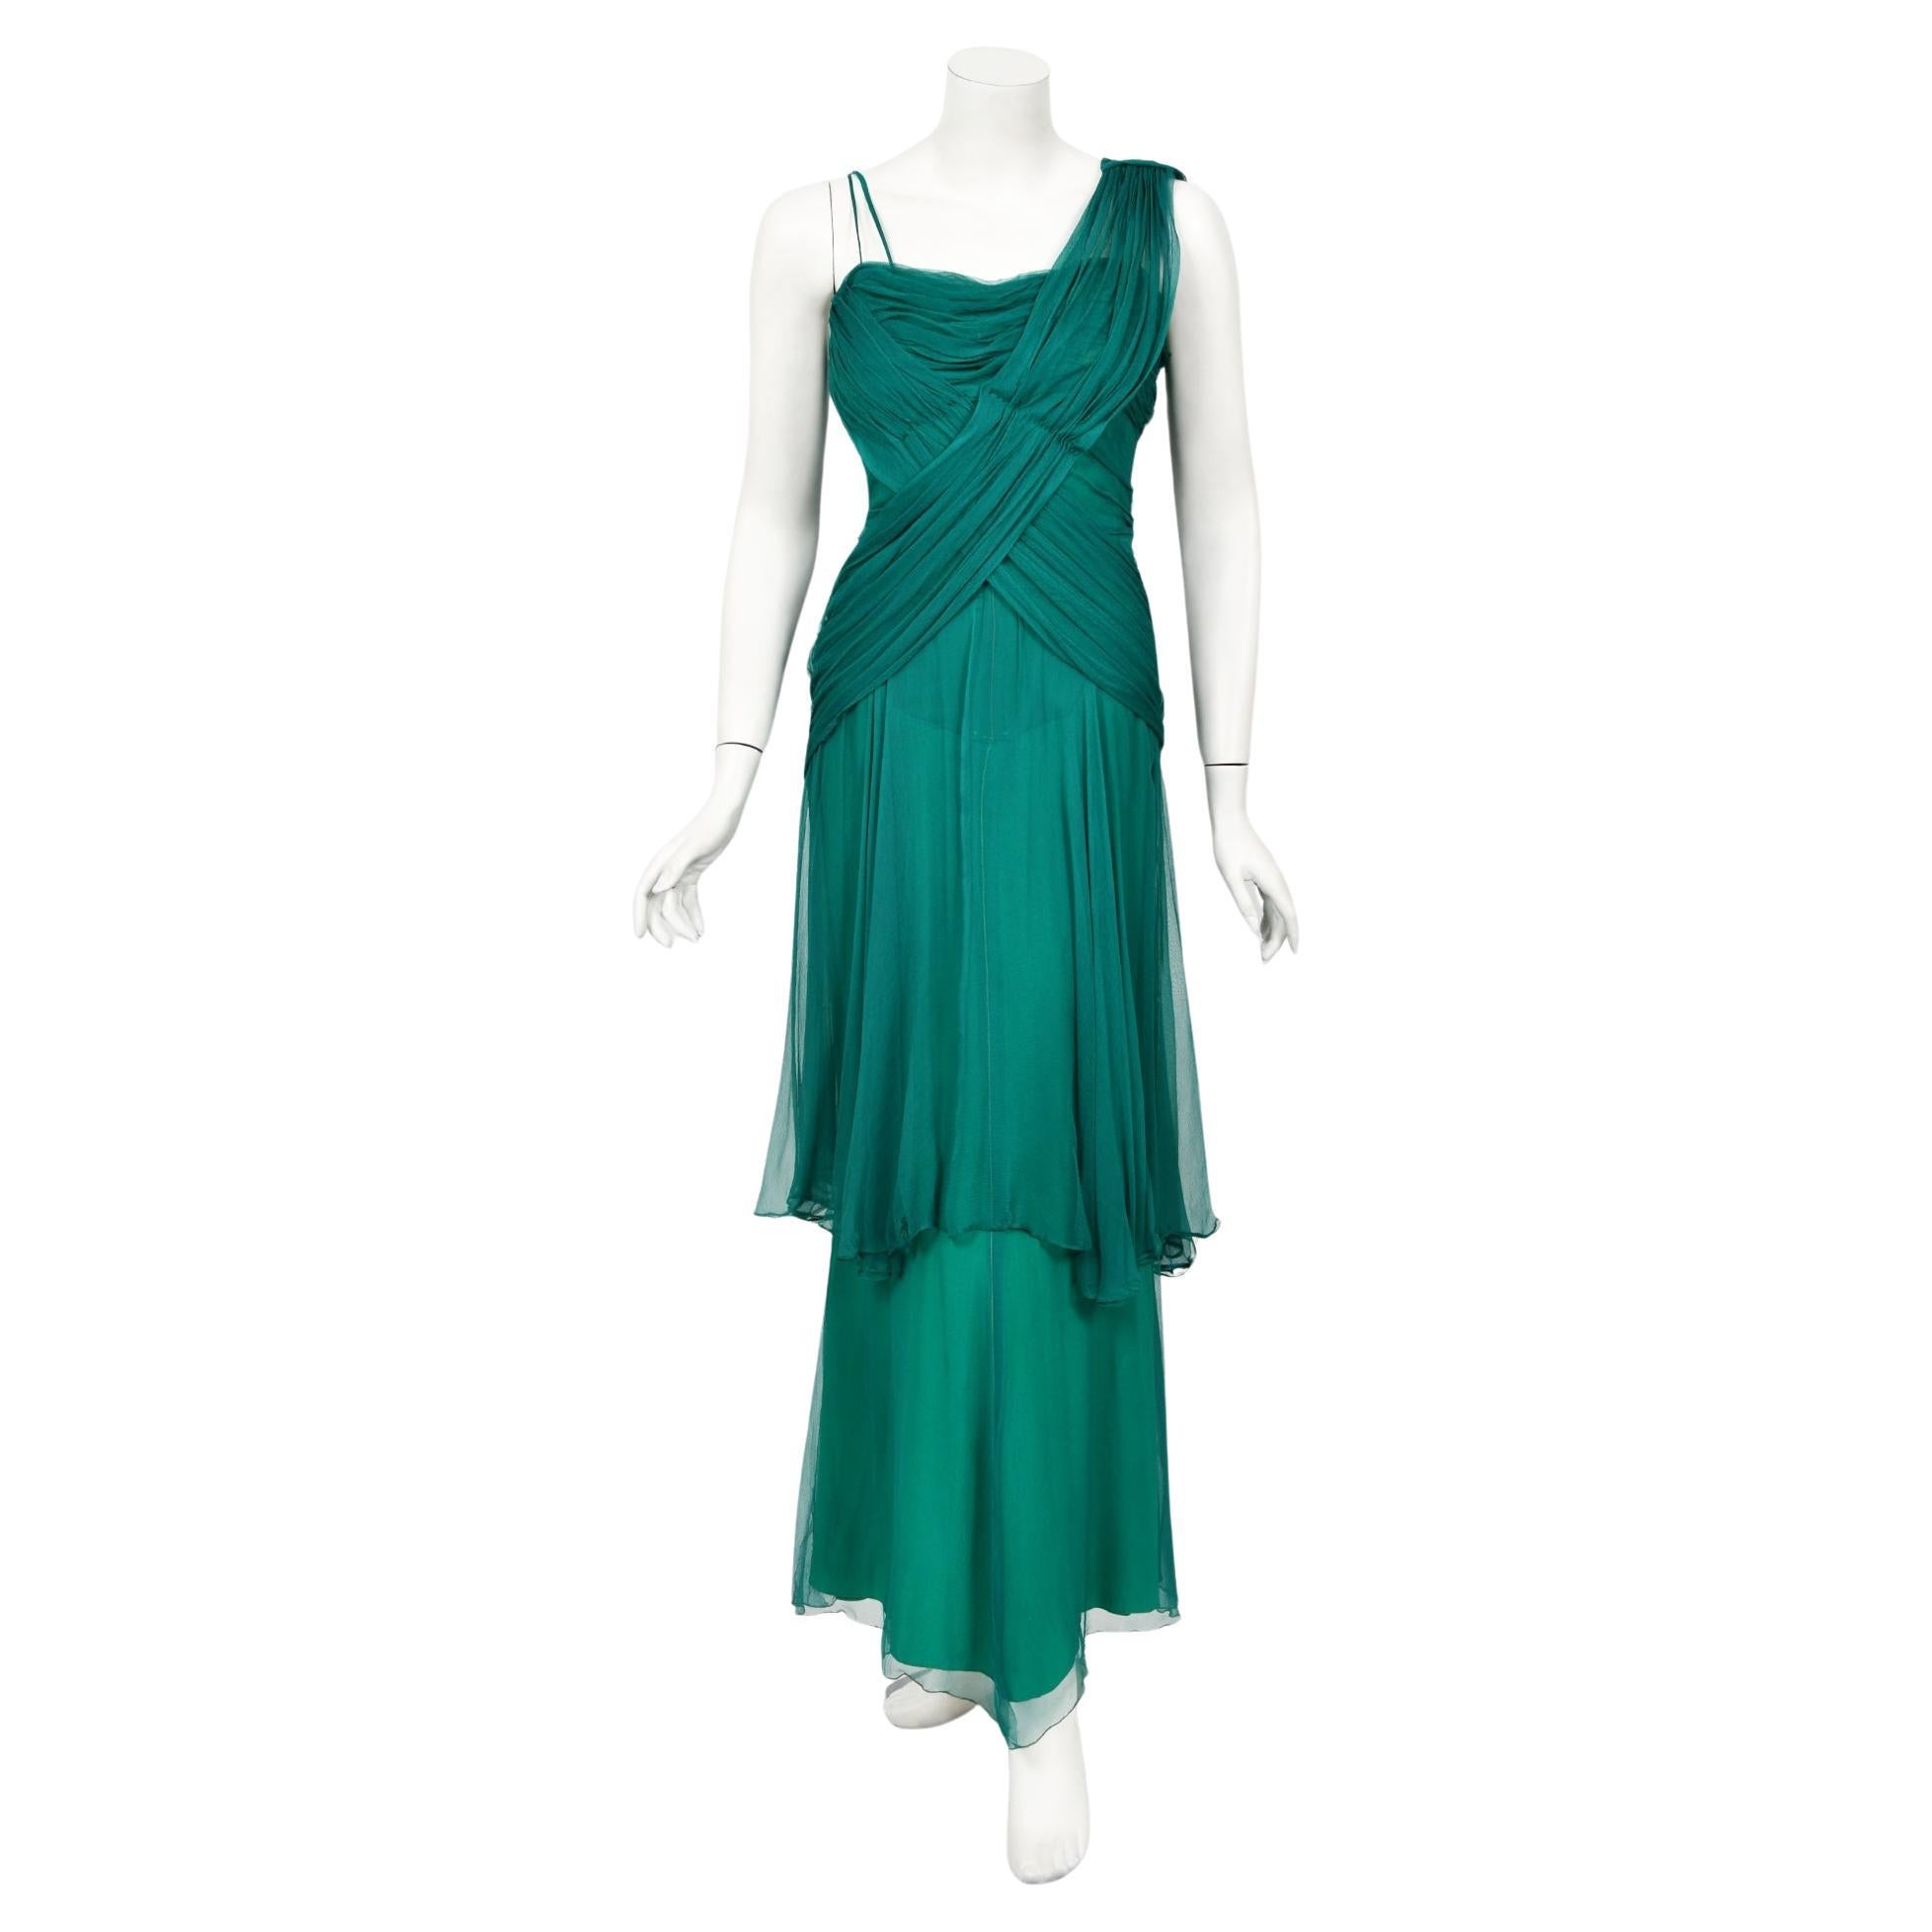 Vintage 1950's Irene Lentz Couture Teal Green Draped Silk Grecian Goddess Gown For Sale